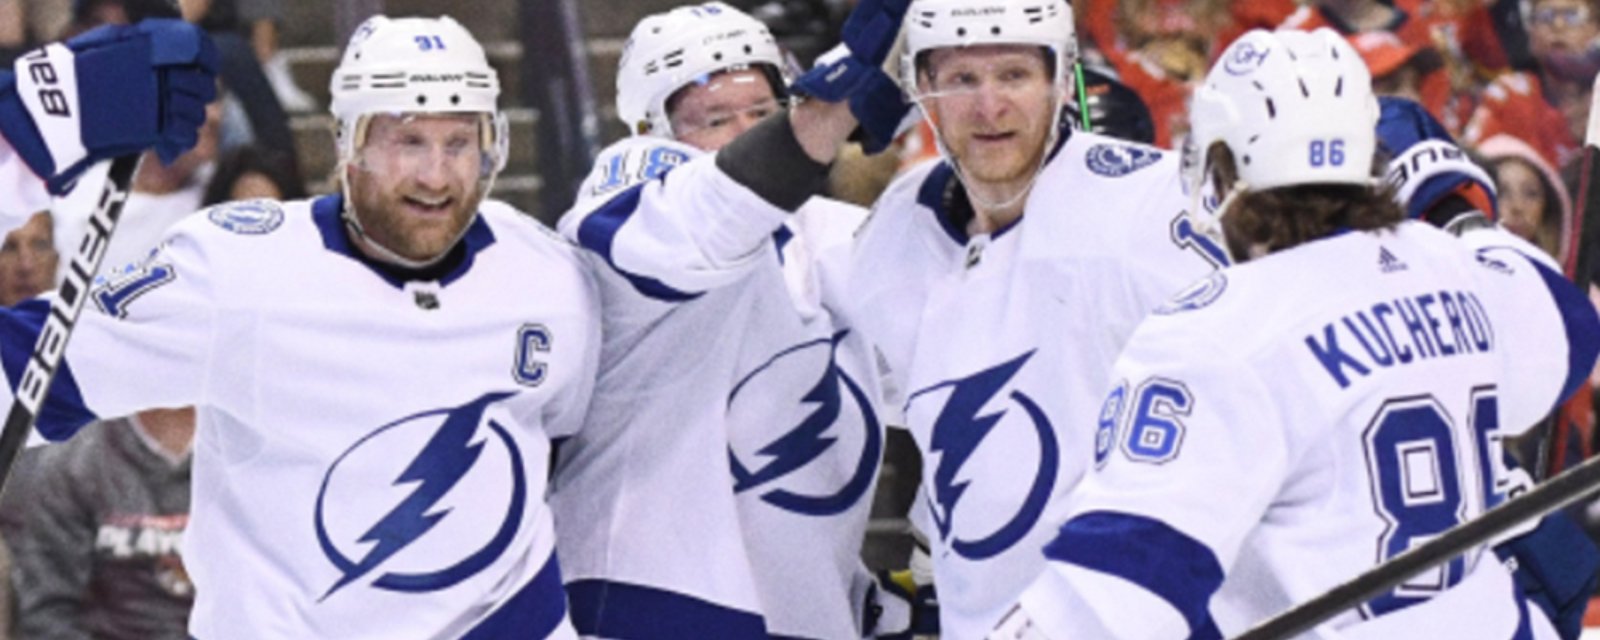 Lightning score with 4 seconds left in regulation to win Game 2